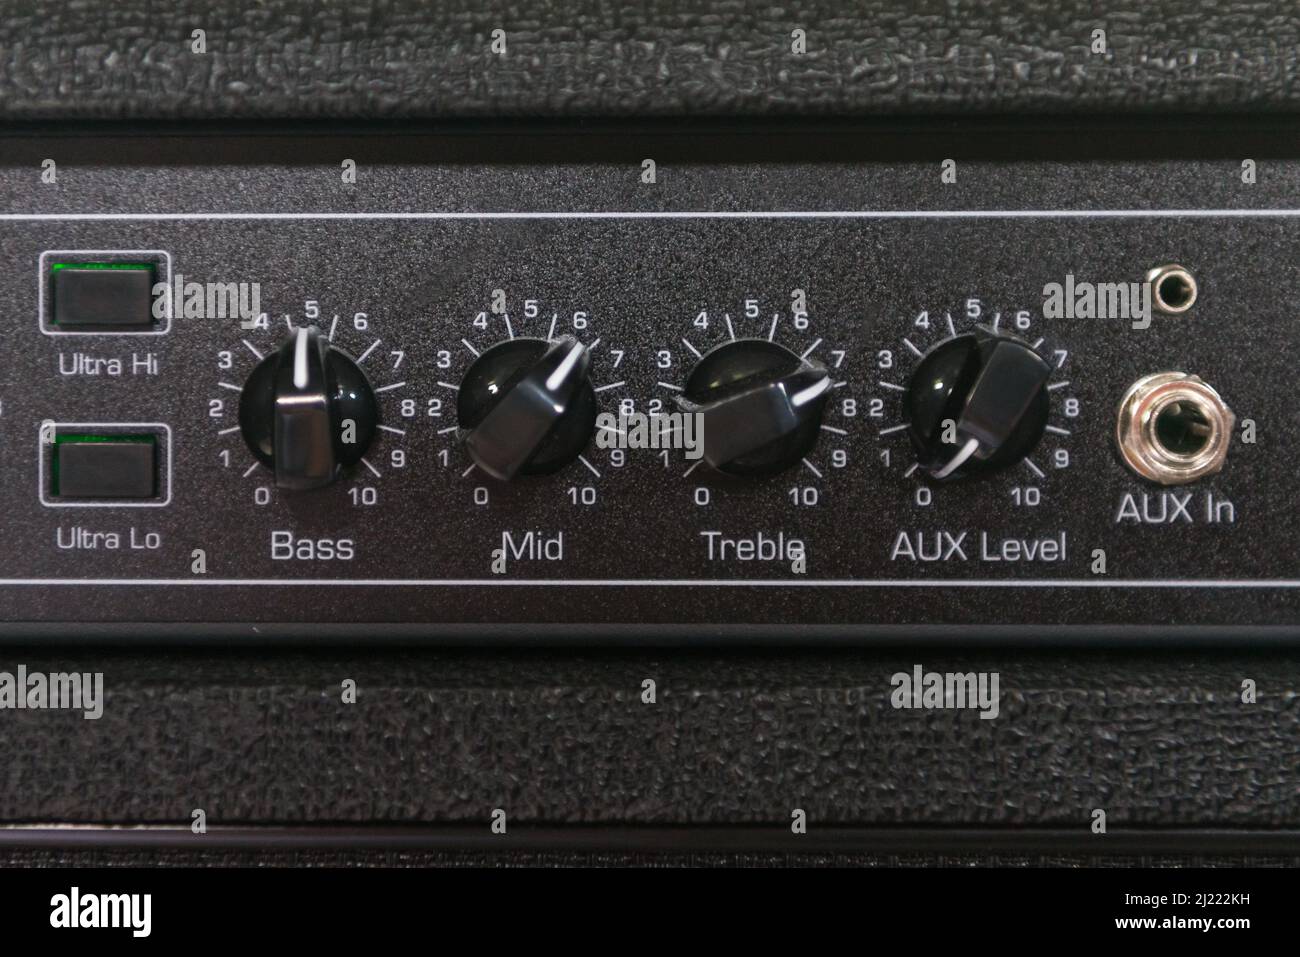 Details of a electric bass amplifier. Stock Photo